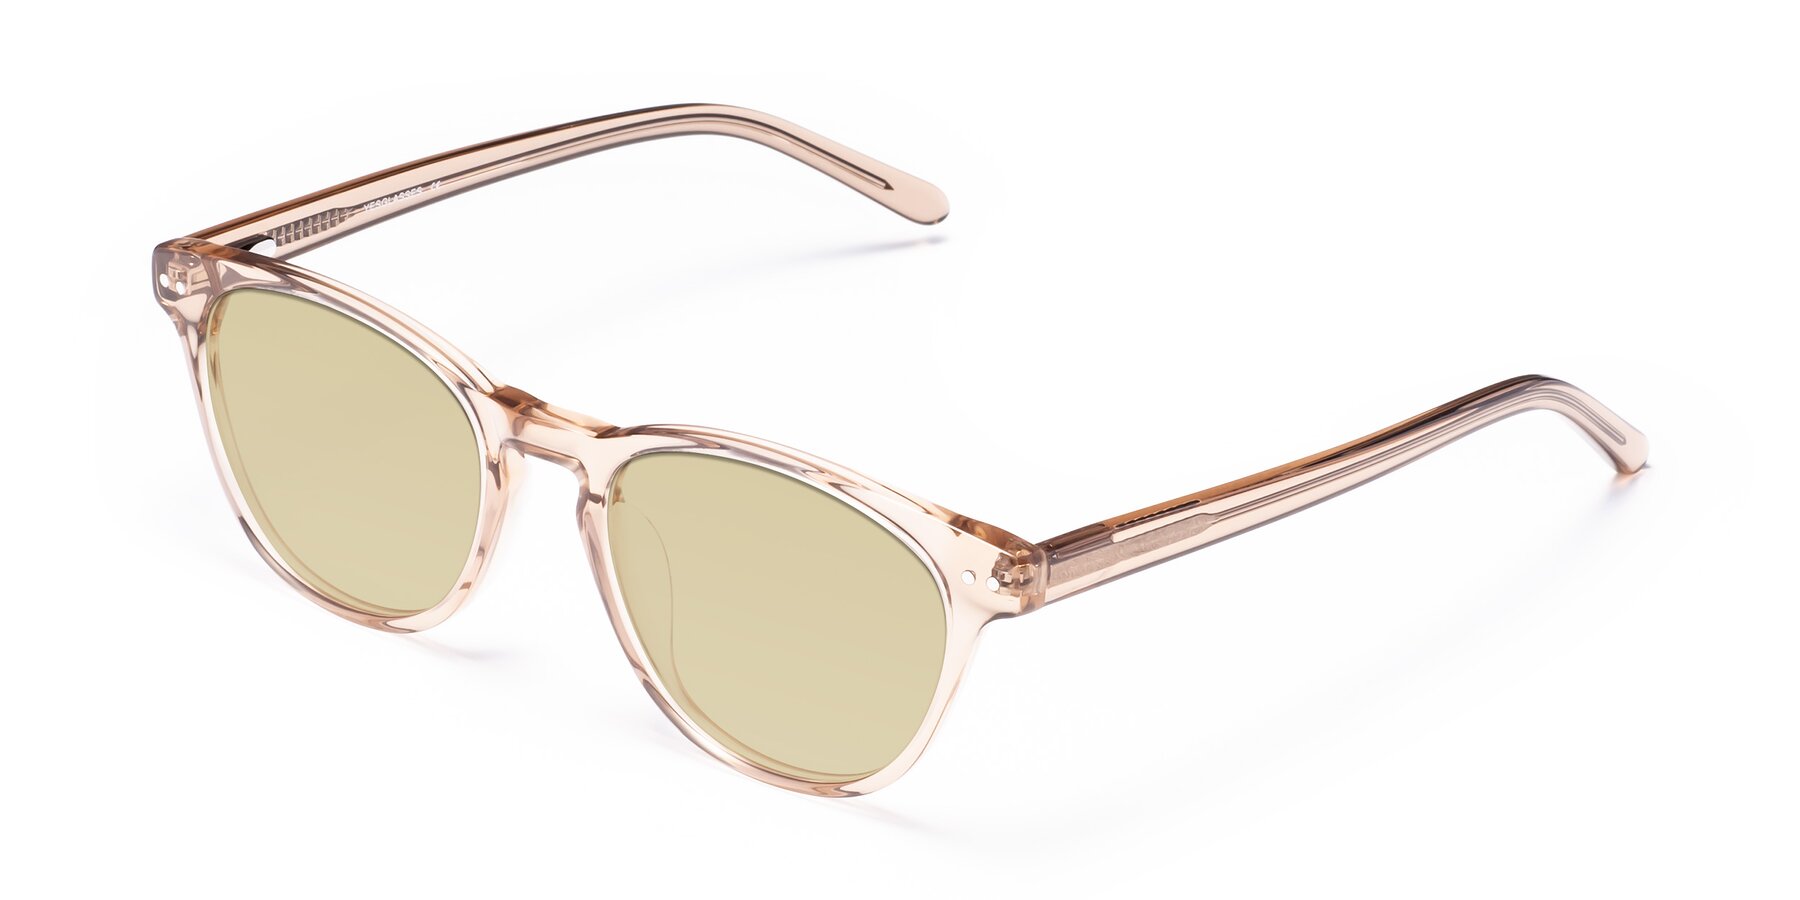 Angle of Blaze in light Brown with Light Champagne Tinted Lenses